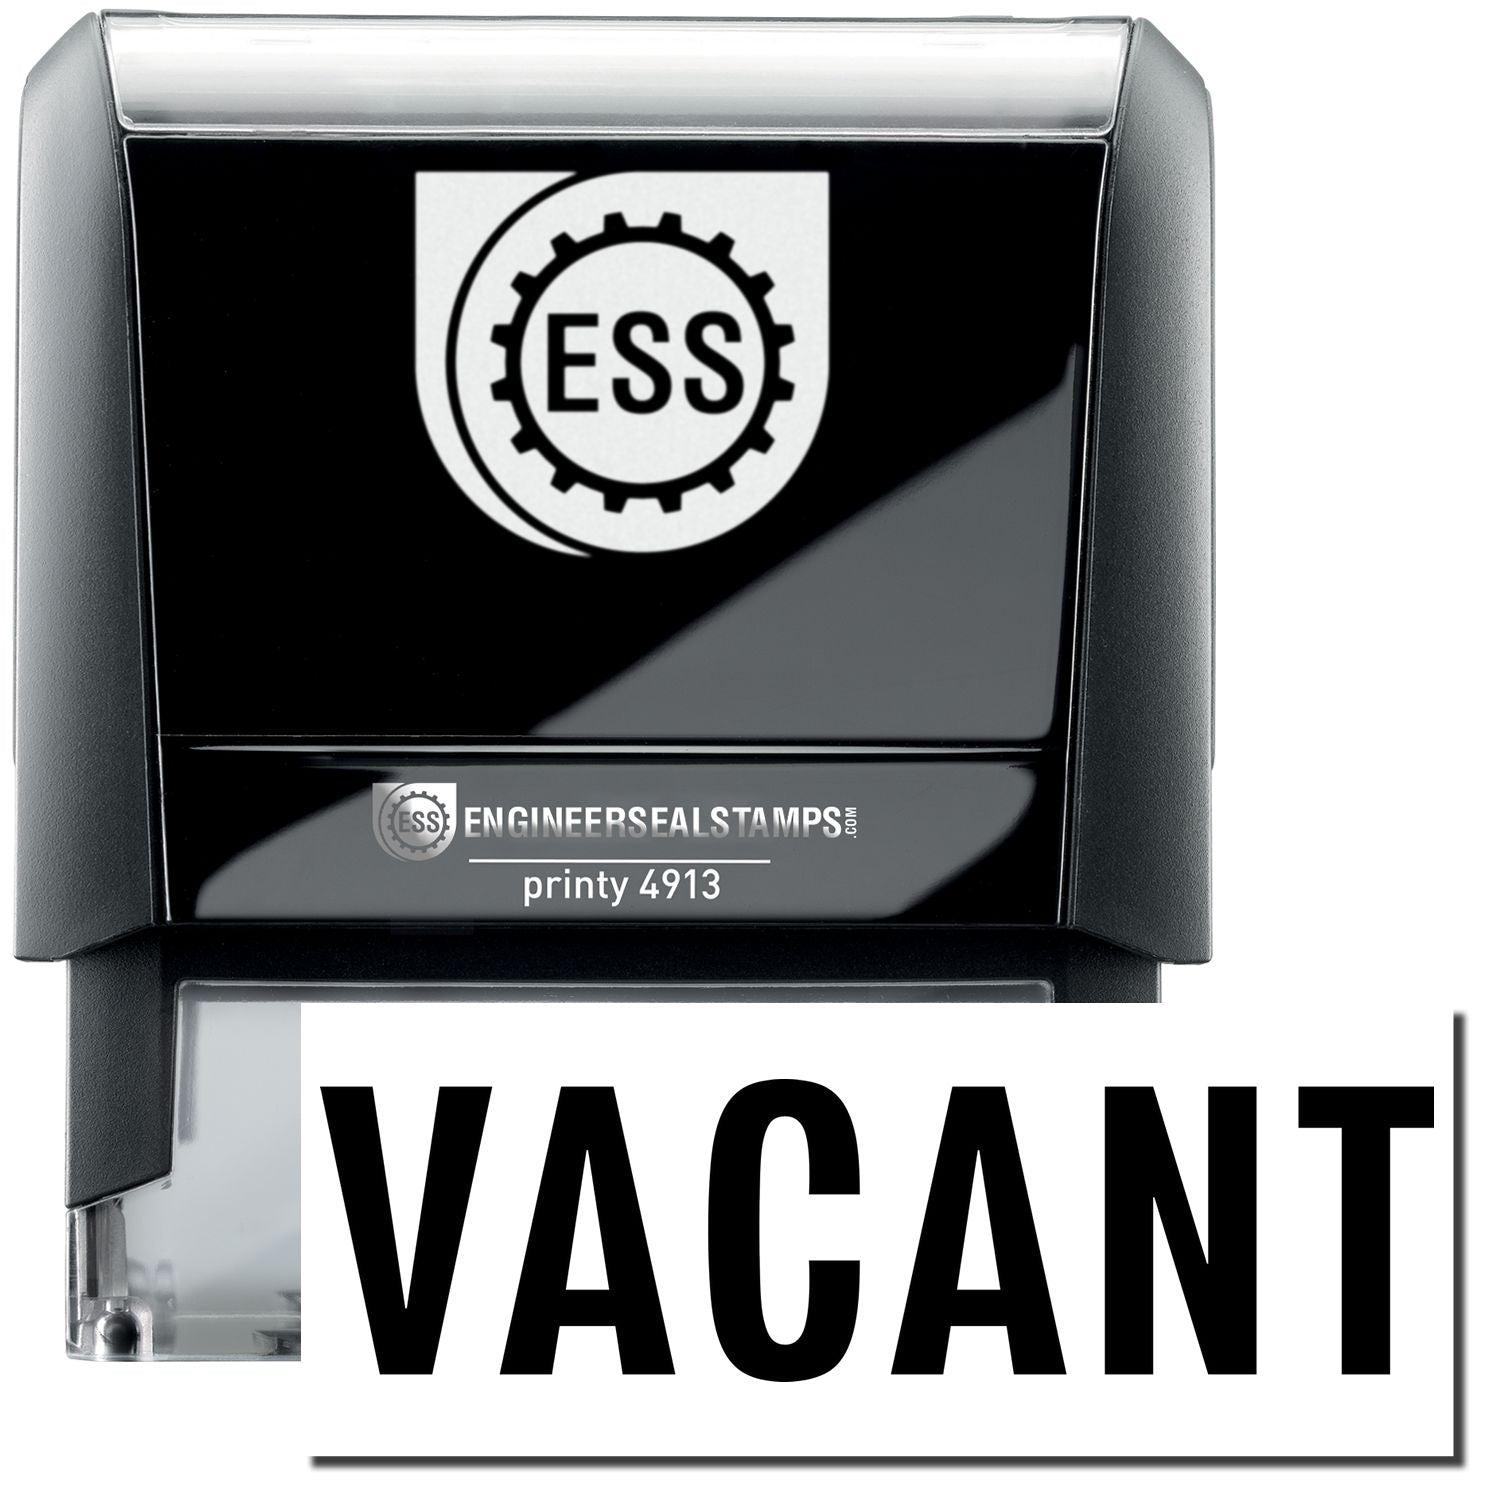 A self-inking stamp with a stamped image showing how the text "VACANT" in a large font is displayed by it after stamping.